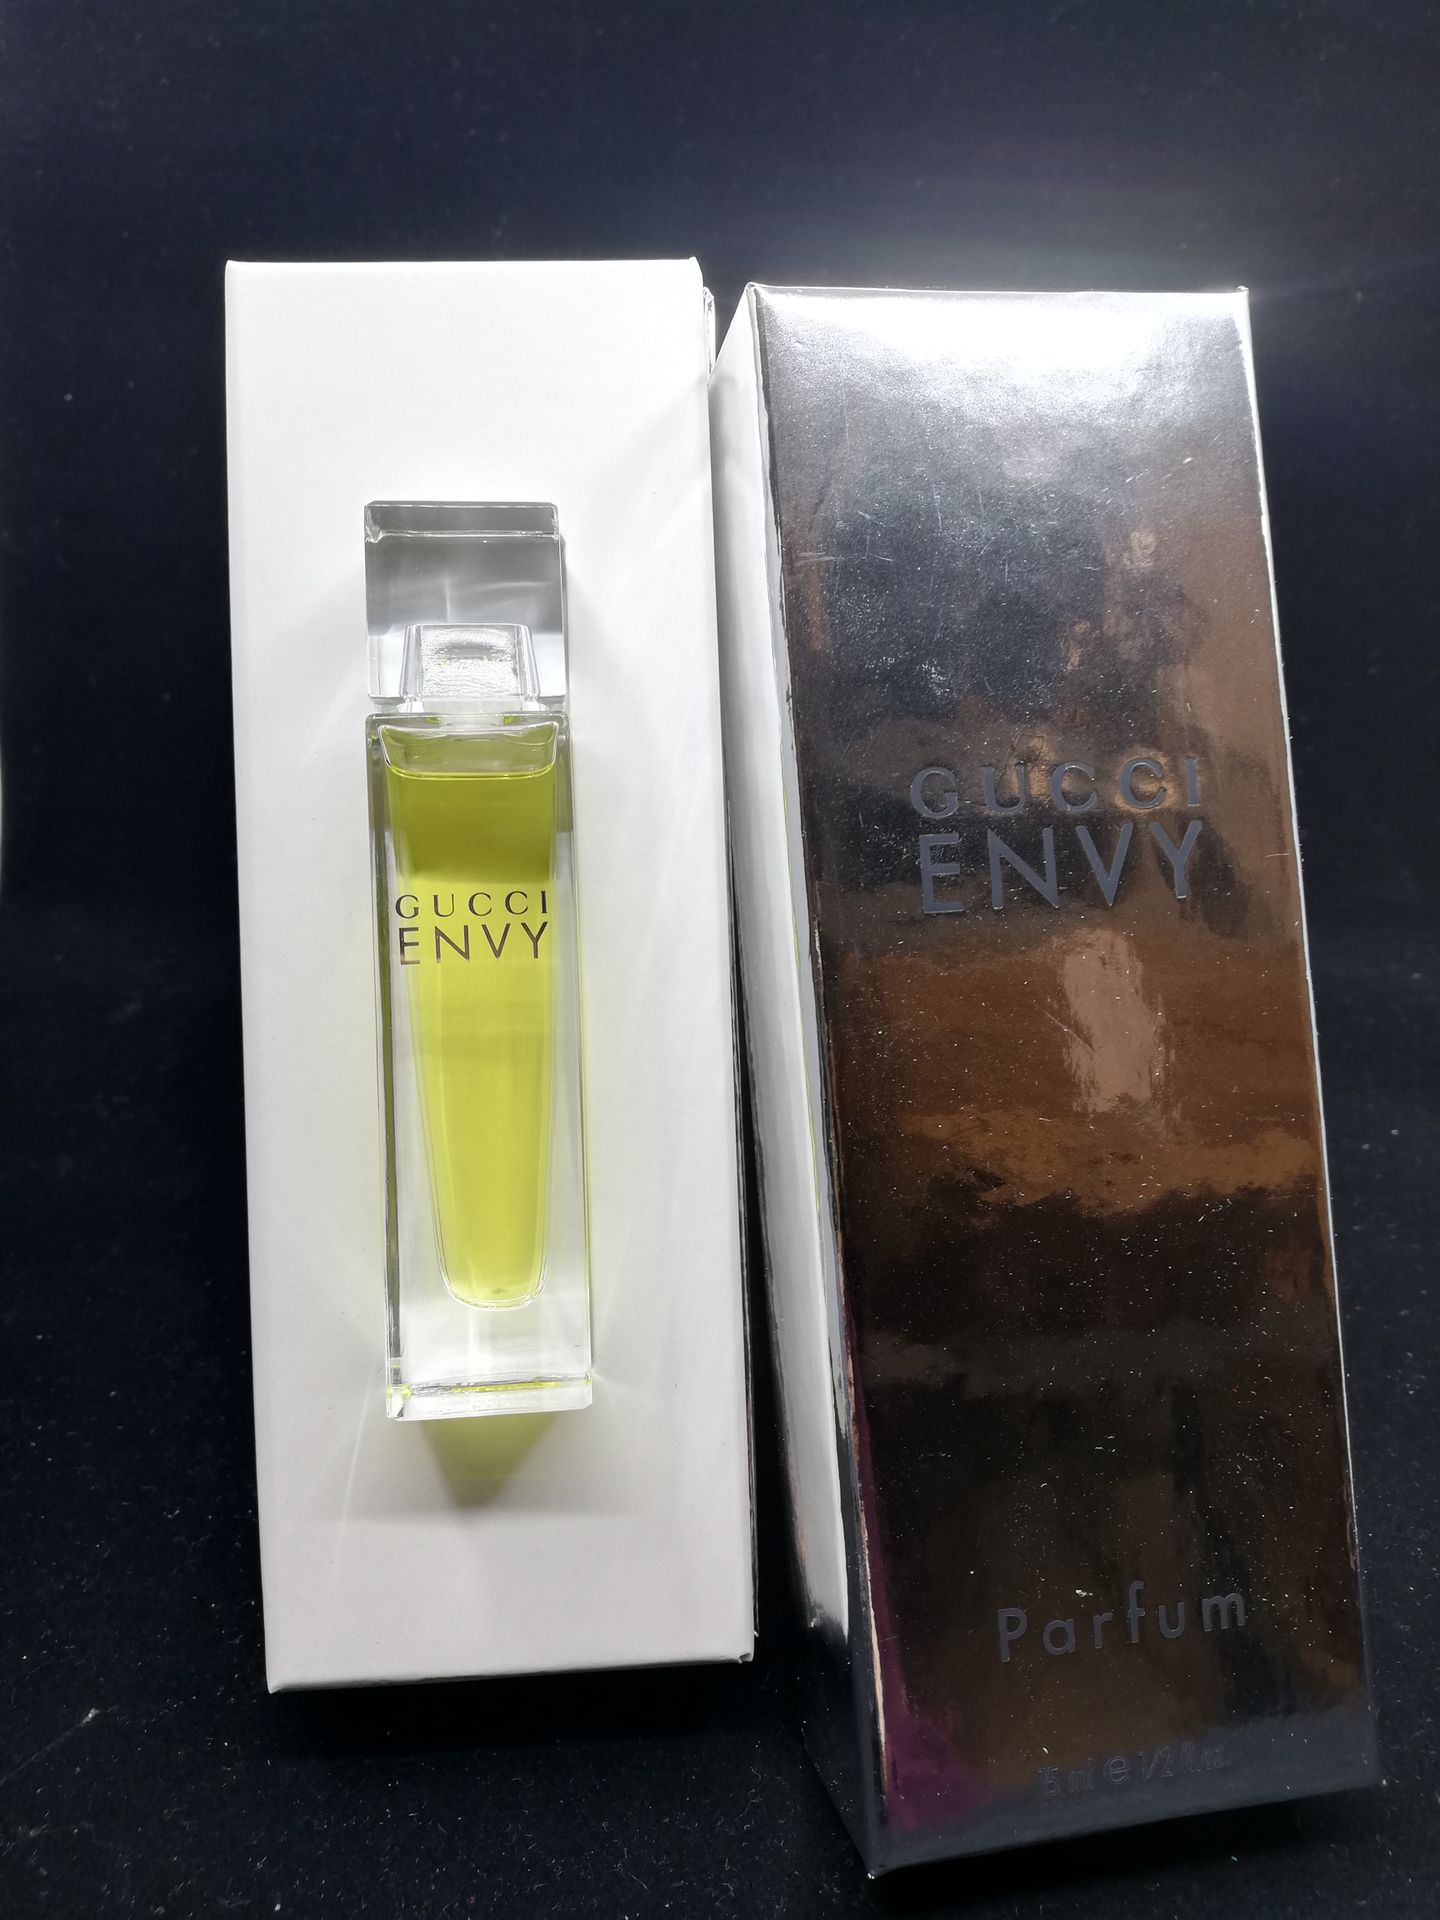 Null Gucci - "Gucci Envy" - (1997)

Presented in a silver cardboard box with a 1&hellip;